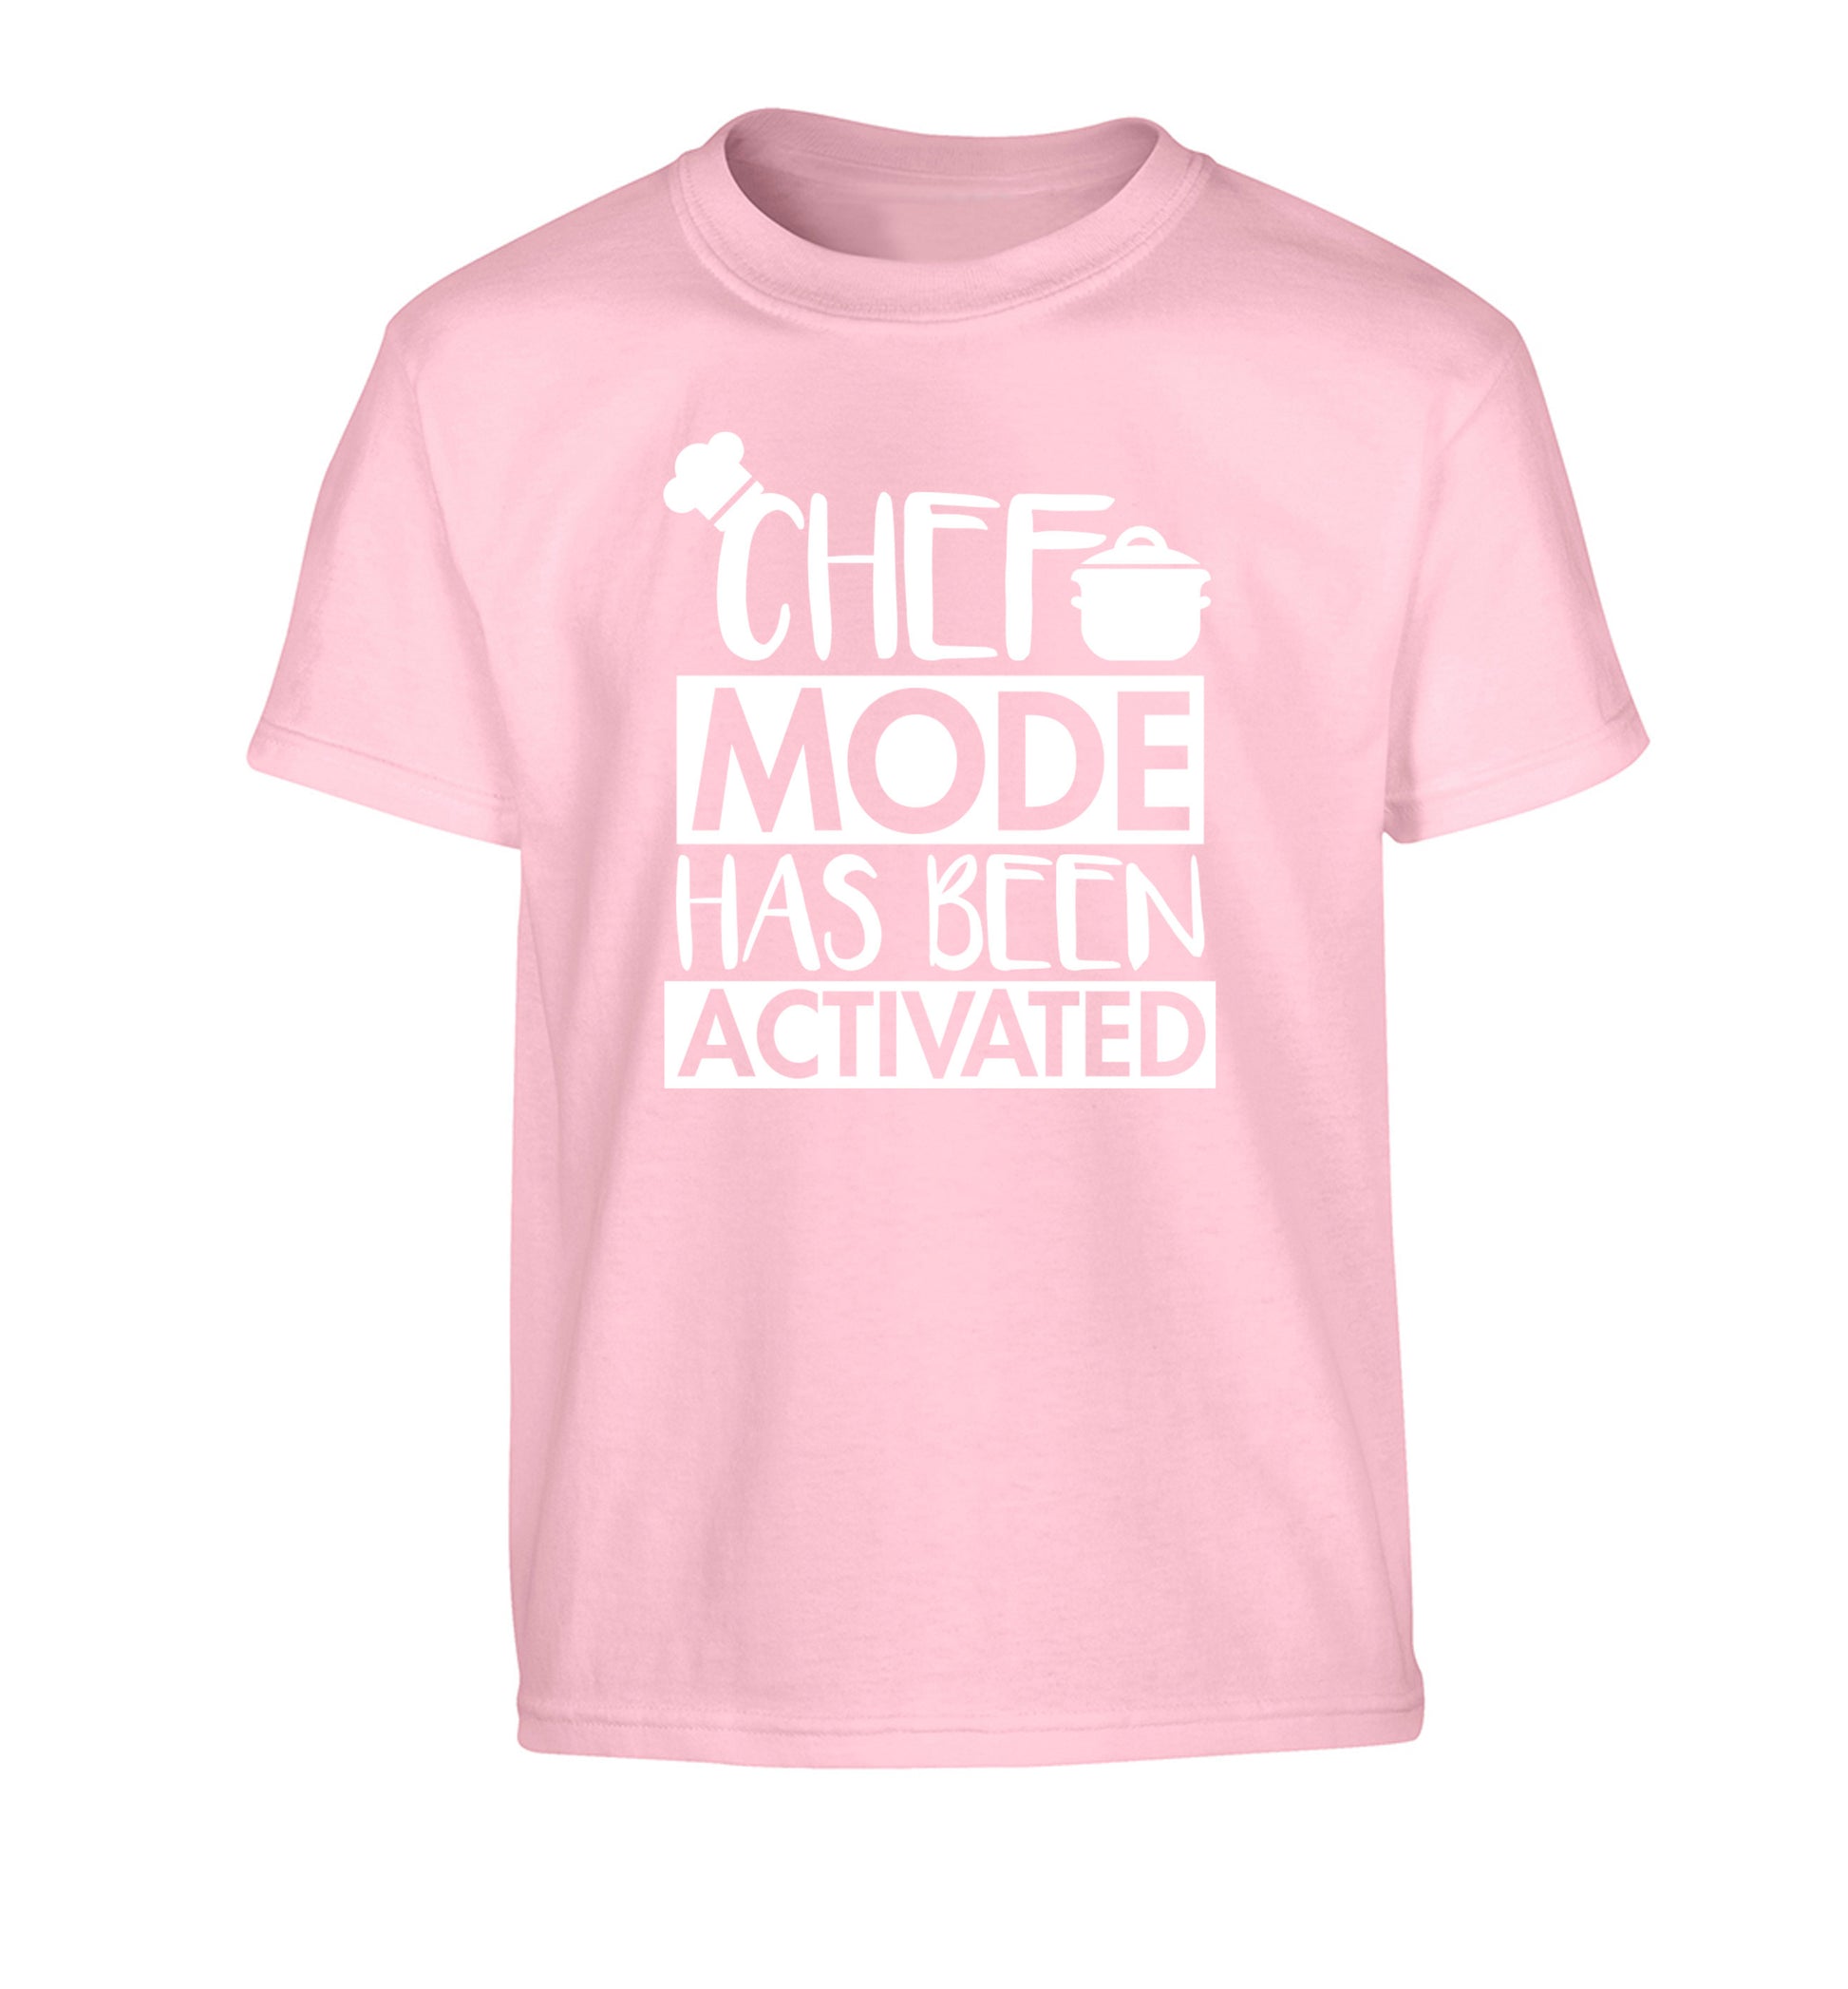 Chef mode has been activated Children's light pink Tshirt 12-14 Years